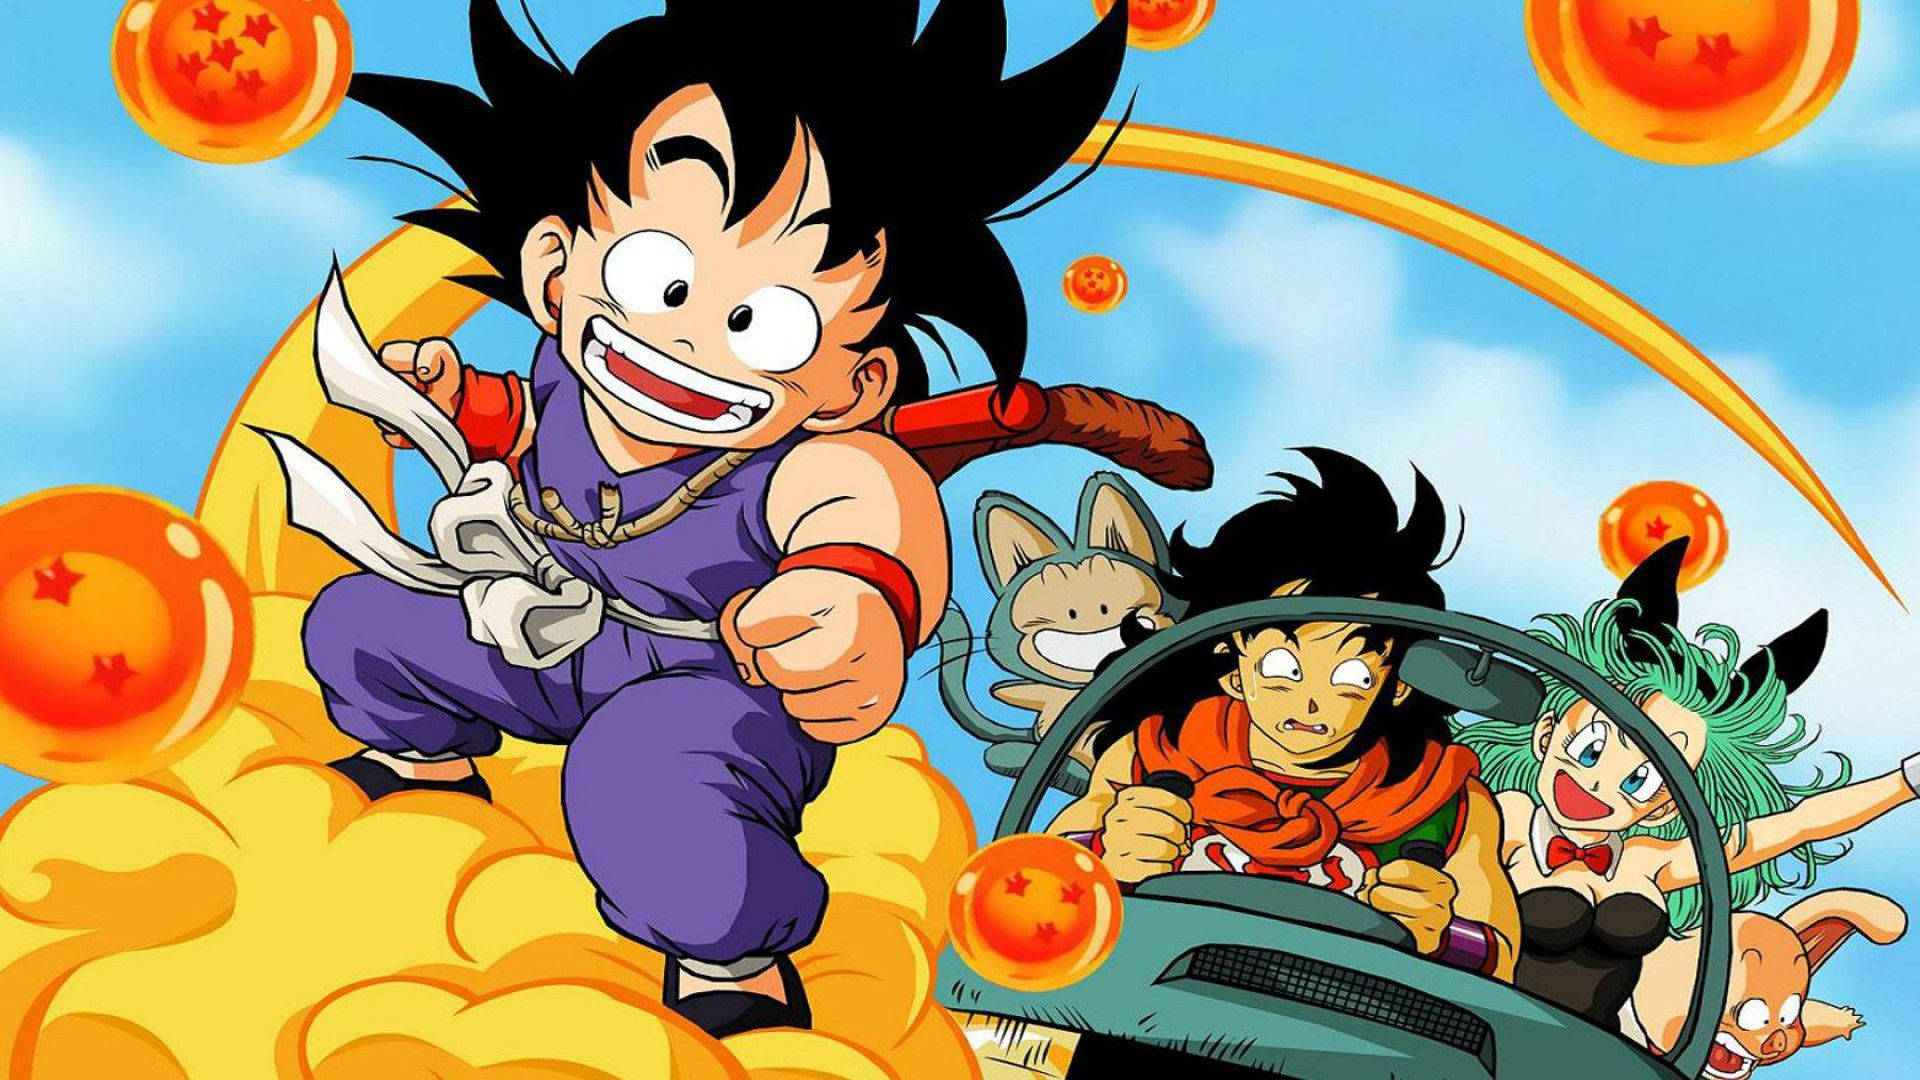 80 Dragon Ball Wallpapers & Backgrounds